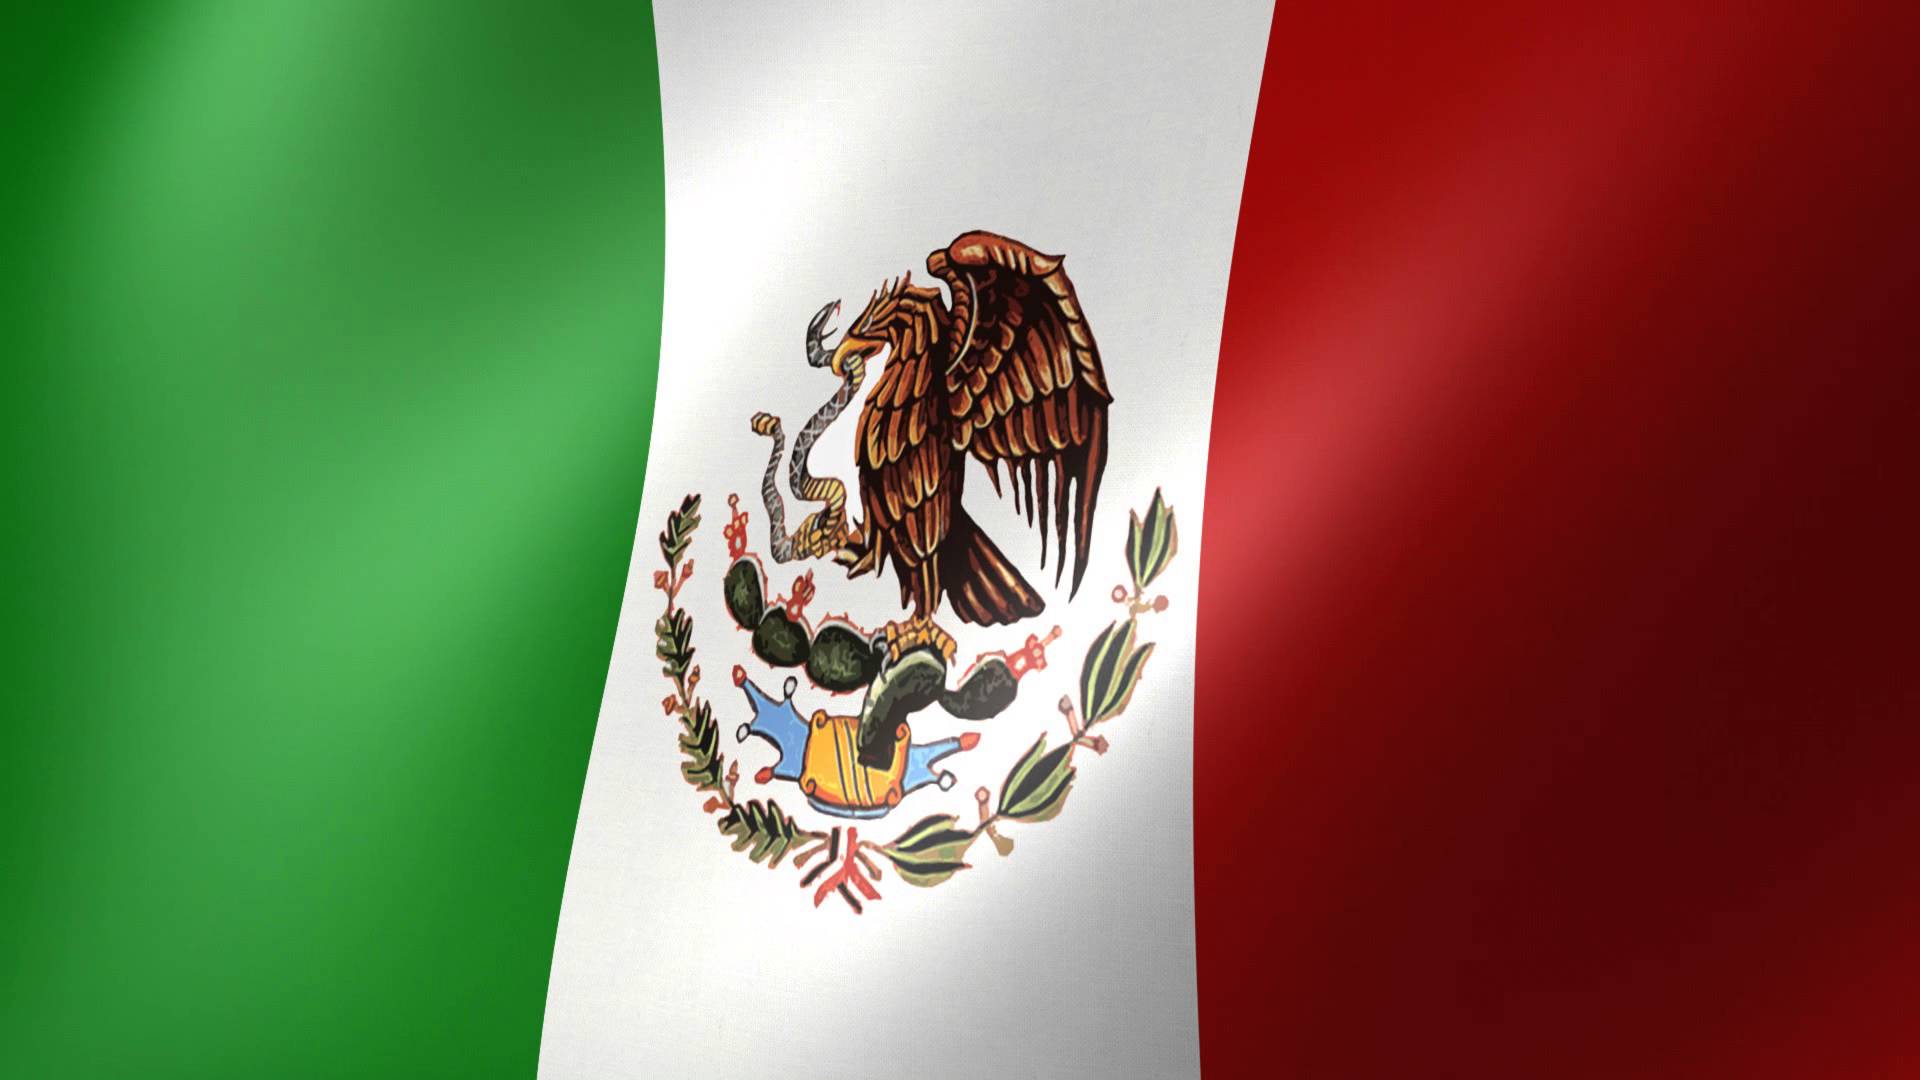 Free Stock Video Download - World Flags: Mexico - YouTube